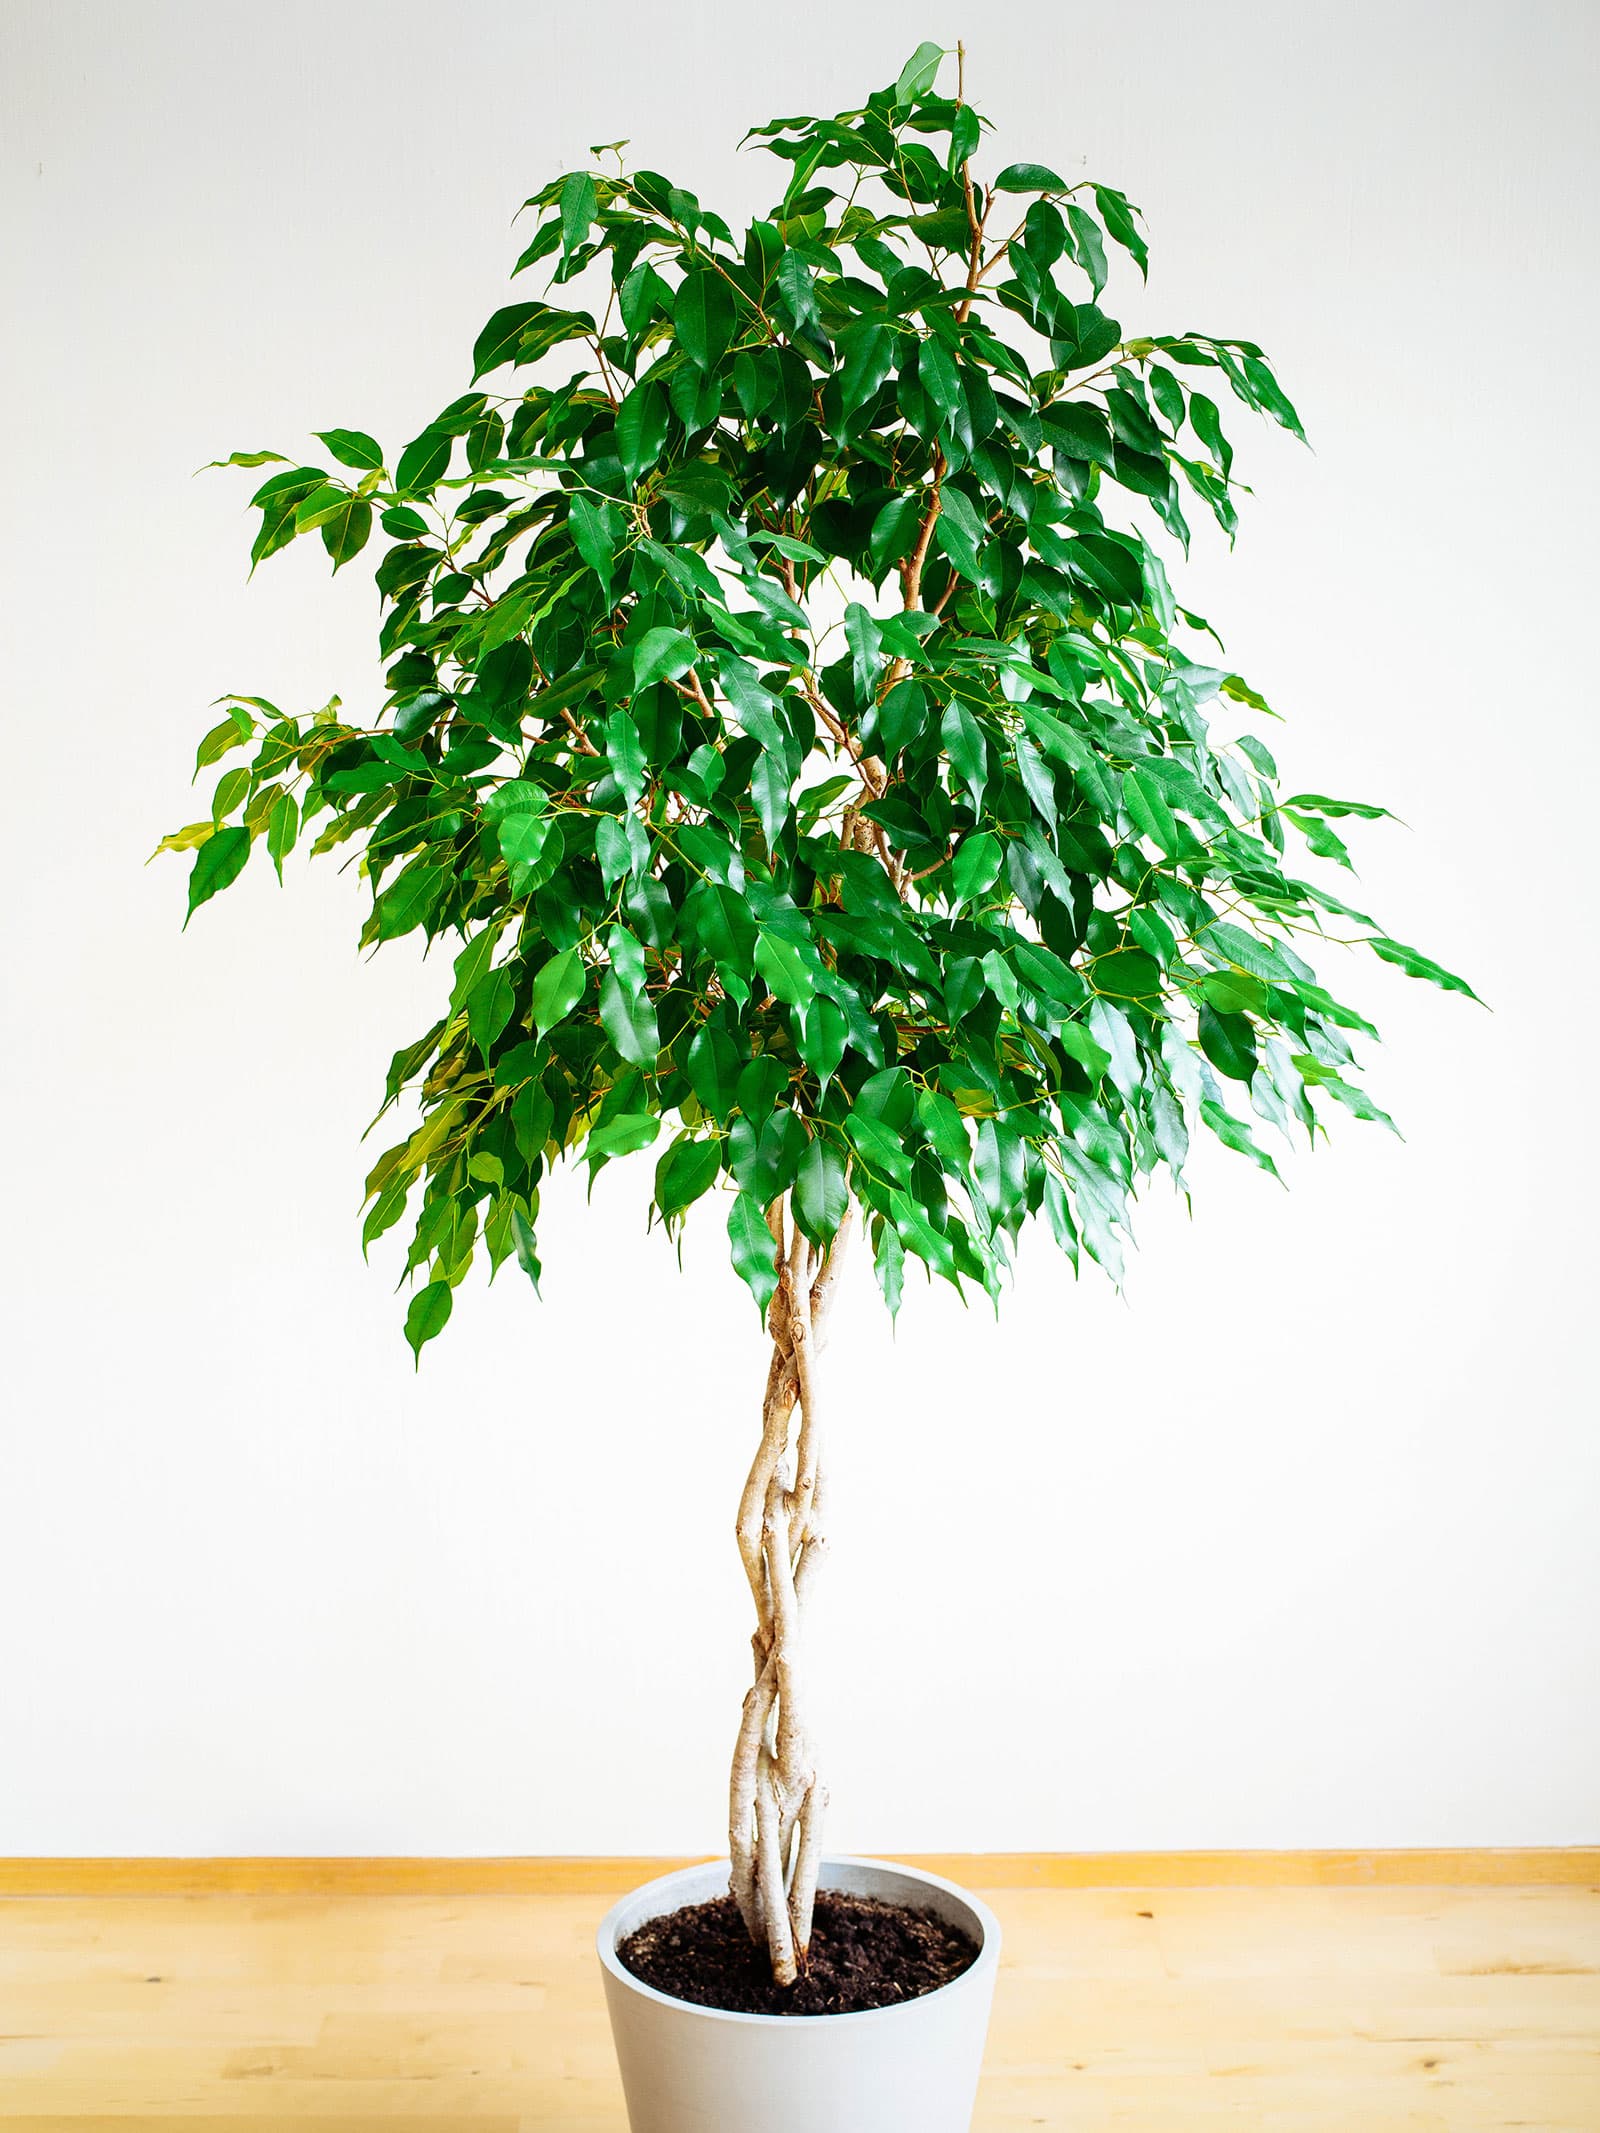 A large weeping fig tree with a braided stem, growing in a white pot indoors and placed on a wooden floor against a white wall